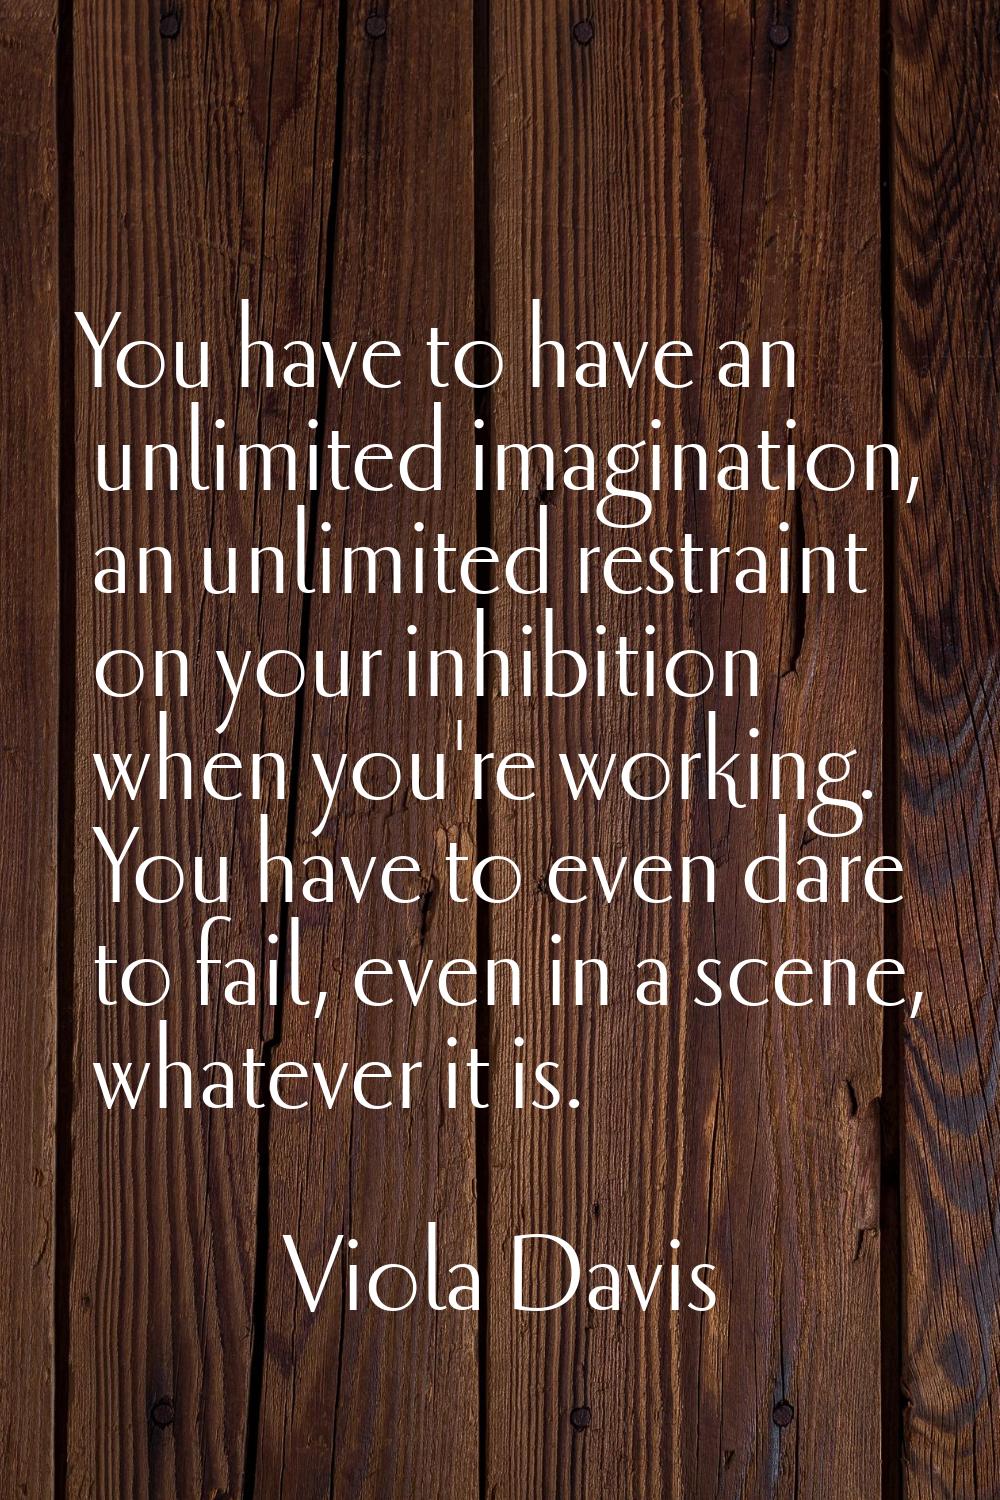 You have to have an unlimited imagination, an unlimited restraint on your inhibition when you're wo